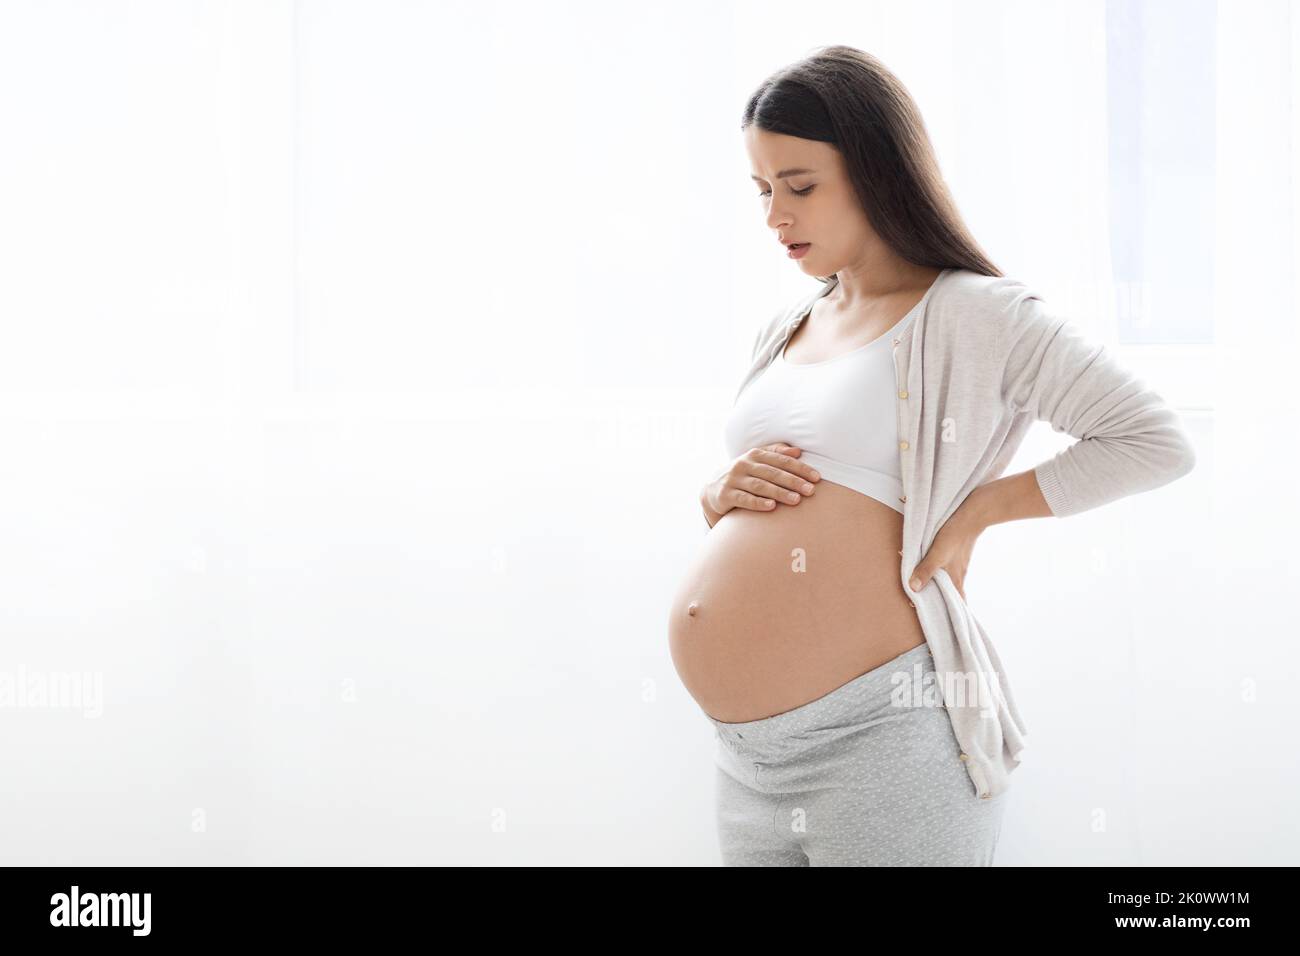 Unhappy pregnant woman having back pain, copy space Stock Photo